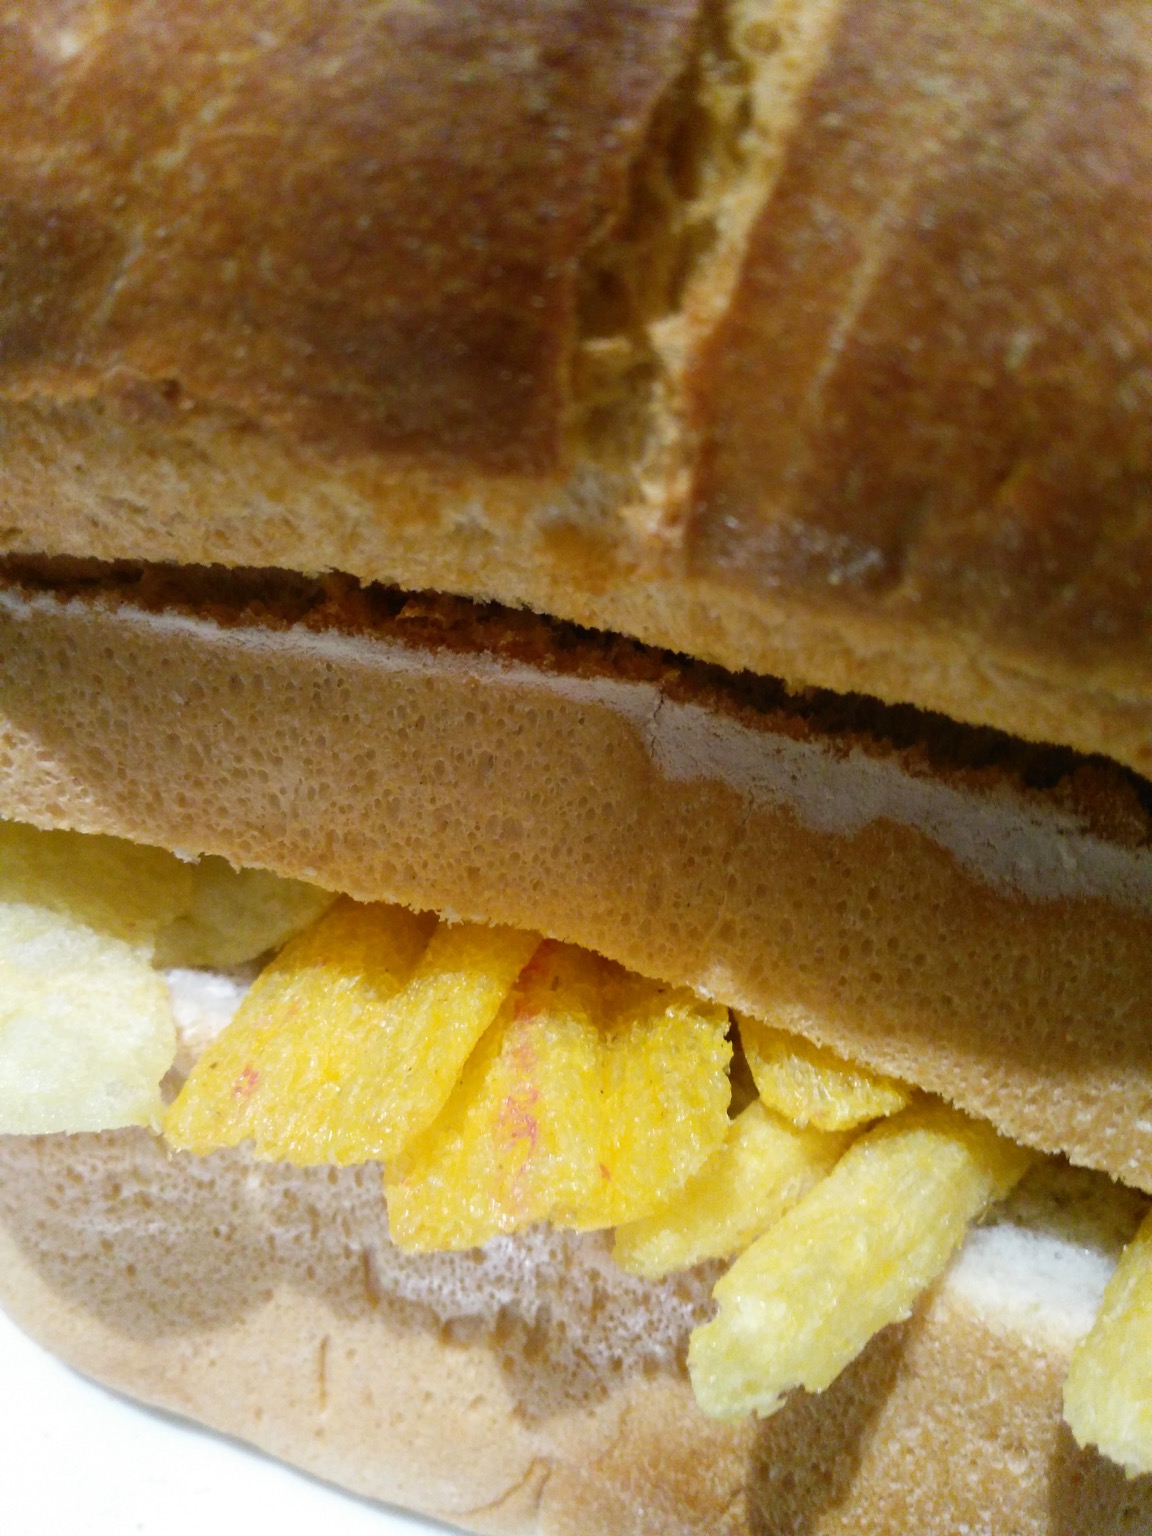 Close-up of loaf with crisps, Frazzles and Chipsticks